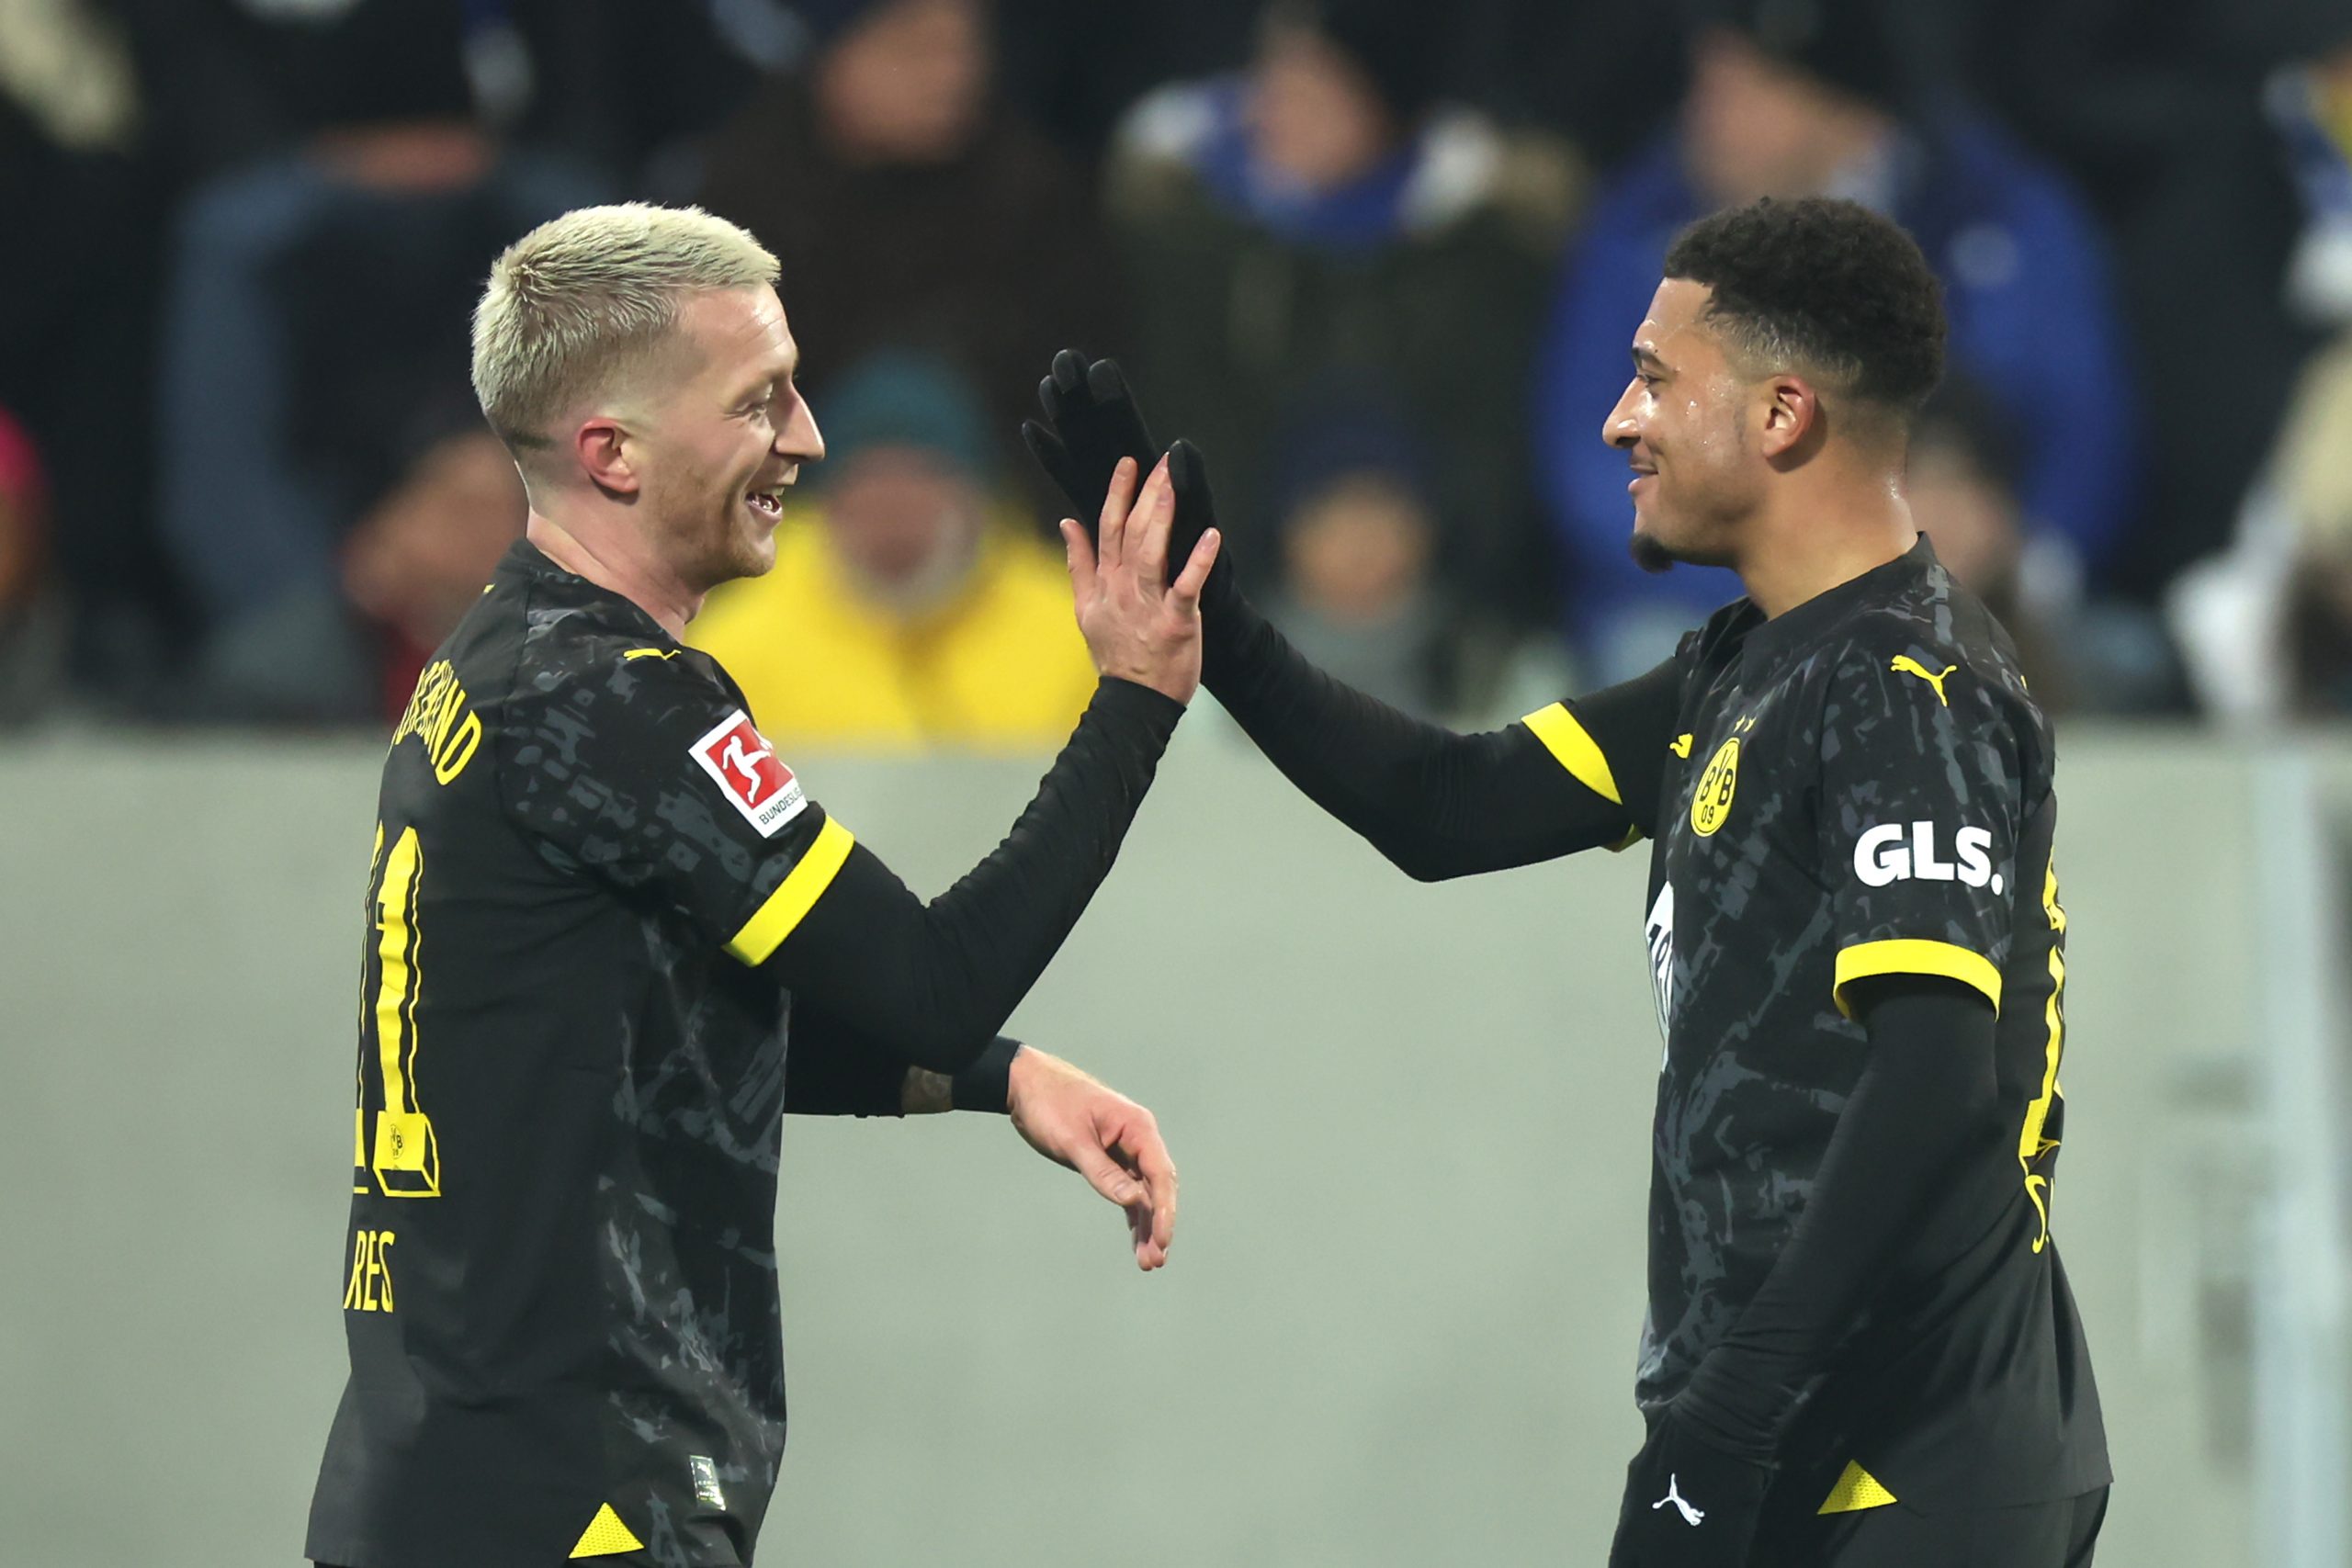 Jadon Sancho and Marco Reus have spent some quality years together at Borussia Dortmund